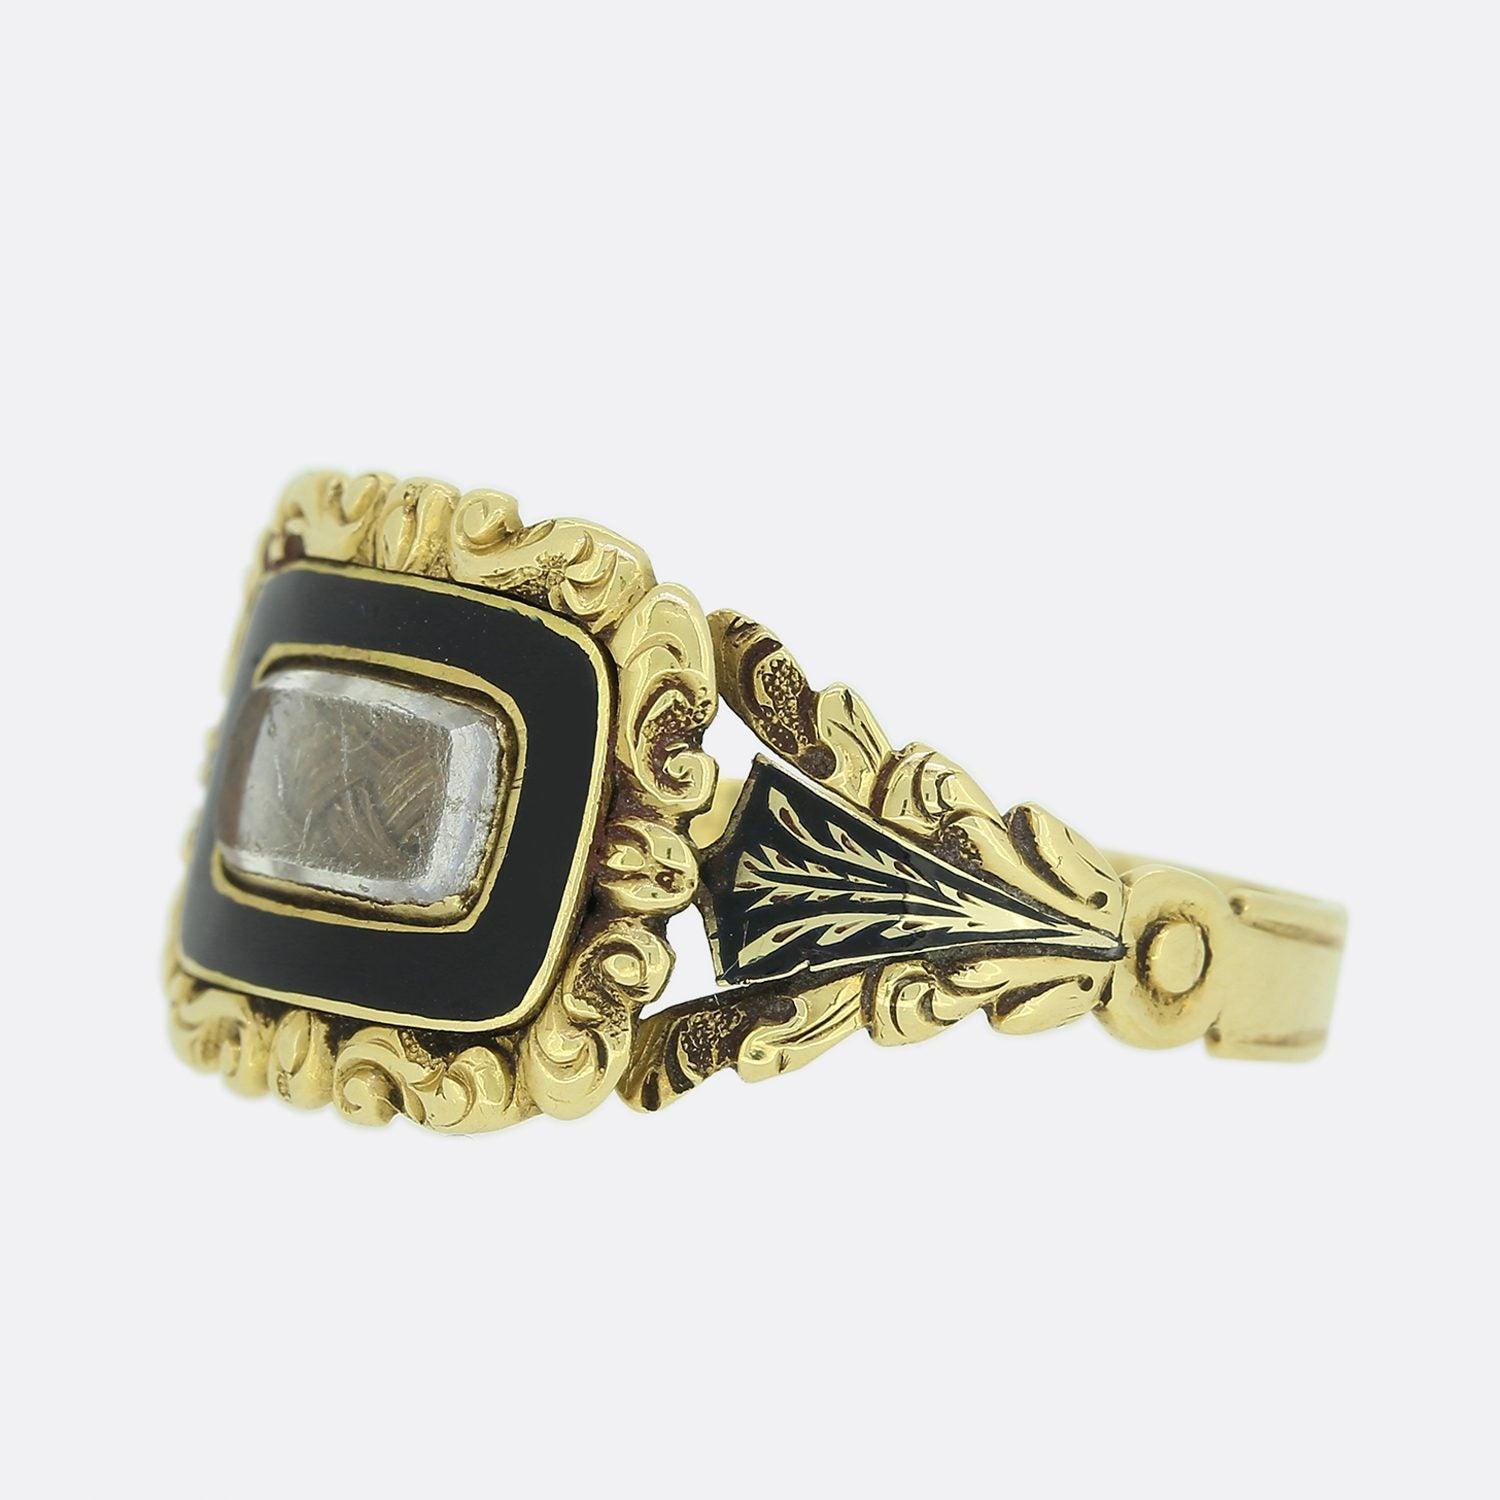 This is a wonderful 18ct yellow gold mourning ring from the late Georgian era. The ring has been set with a central rectangular window that features a small locket of hair with a border of black enamel. Both the face of the ring and the shoulders of